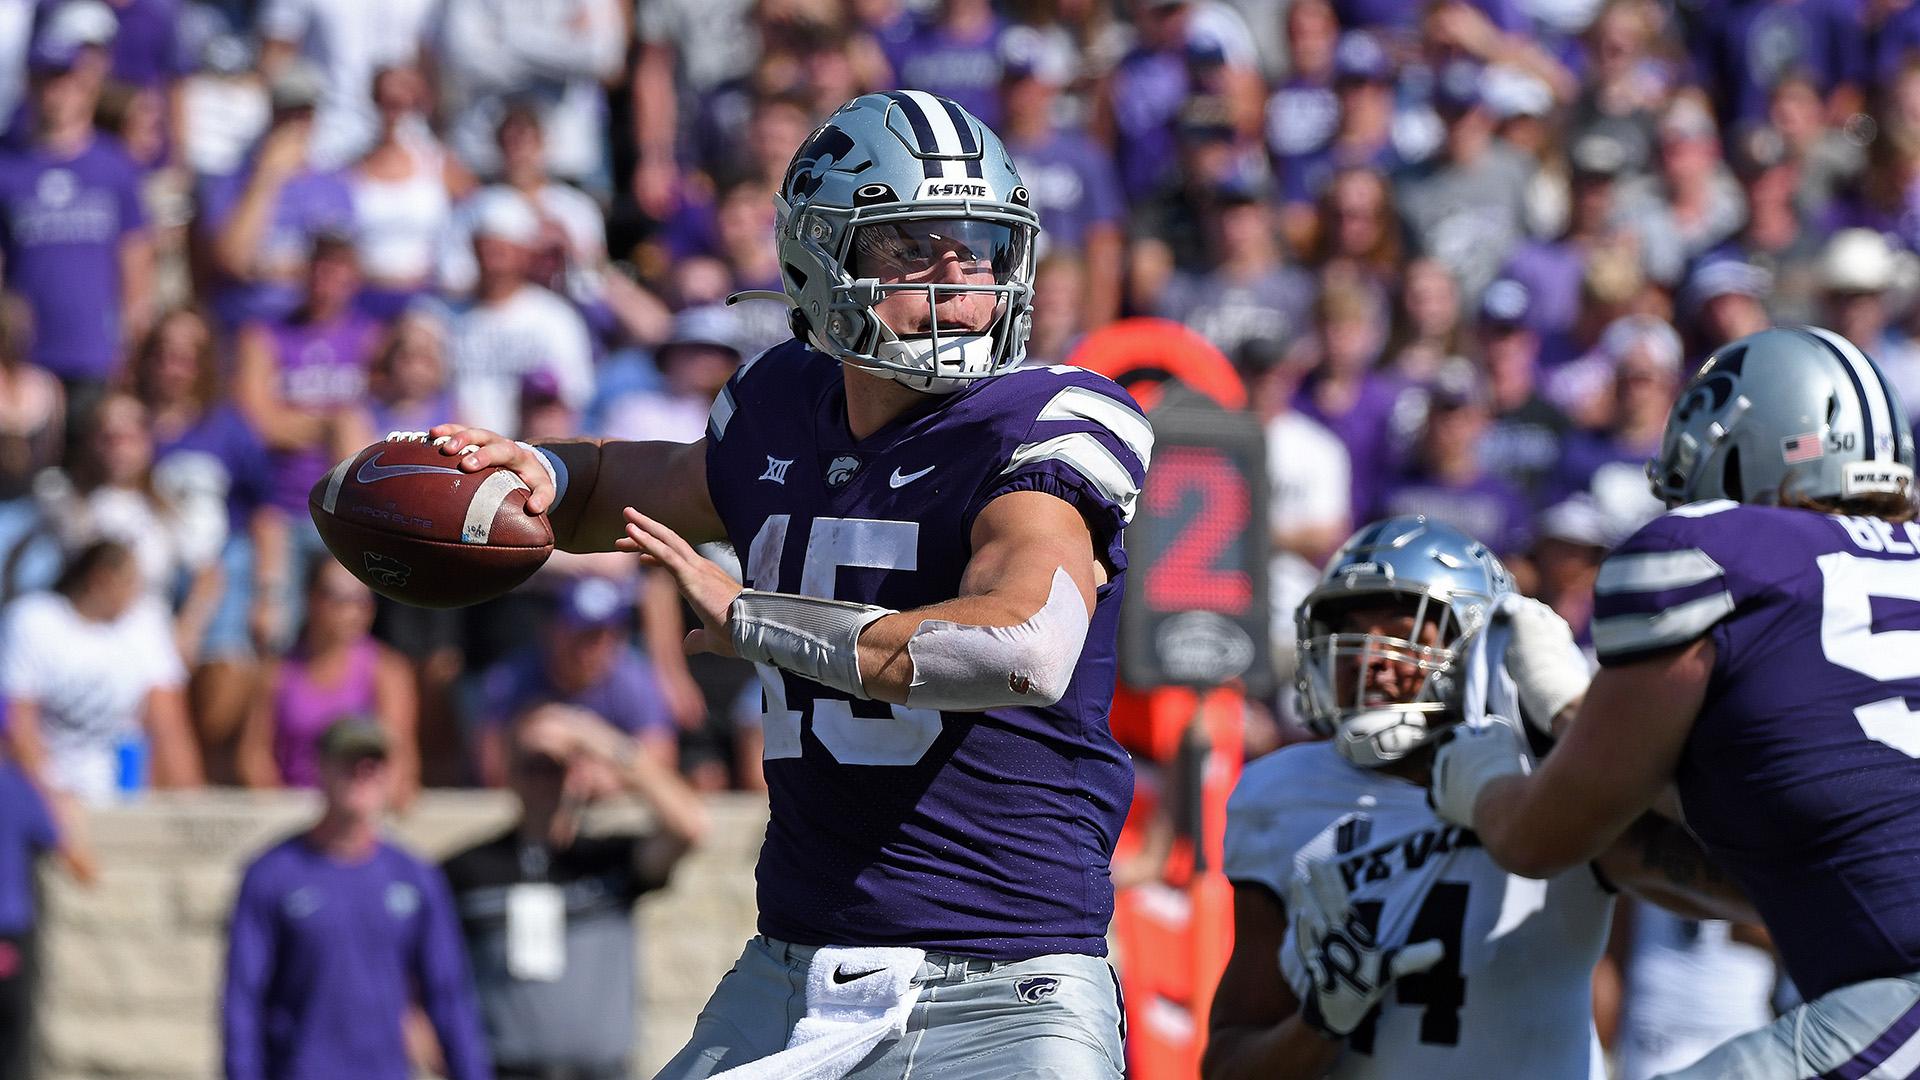 Will Howard is the field general at QB for Kansas State. He exhibits solid accuracy and good poise. Senior Hula Bowl scout Mike Bey breaks down Howard as an NFL Prospect in his report.